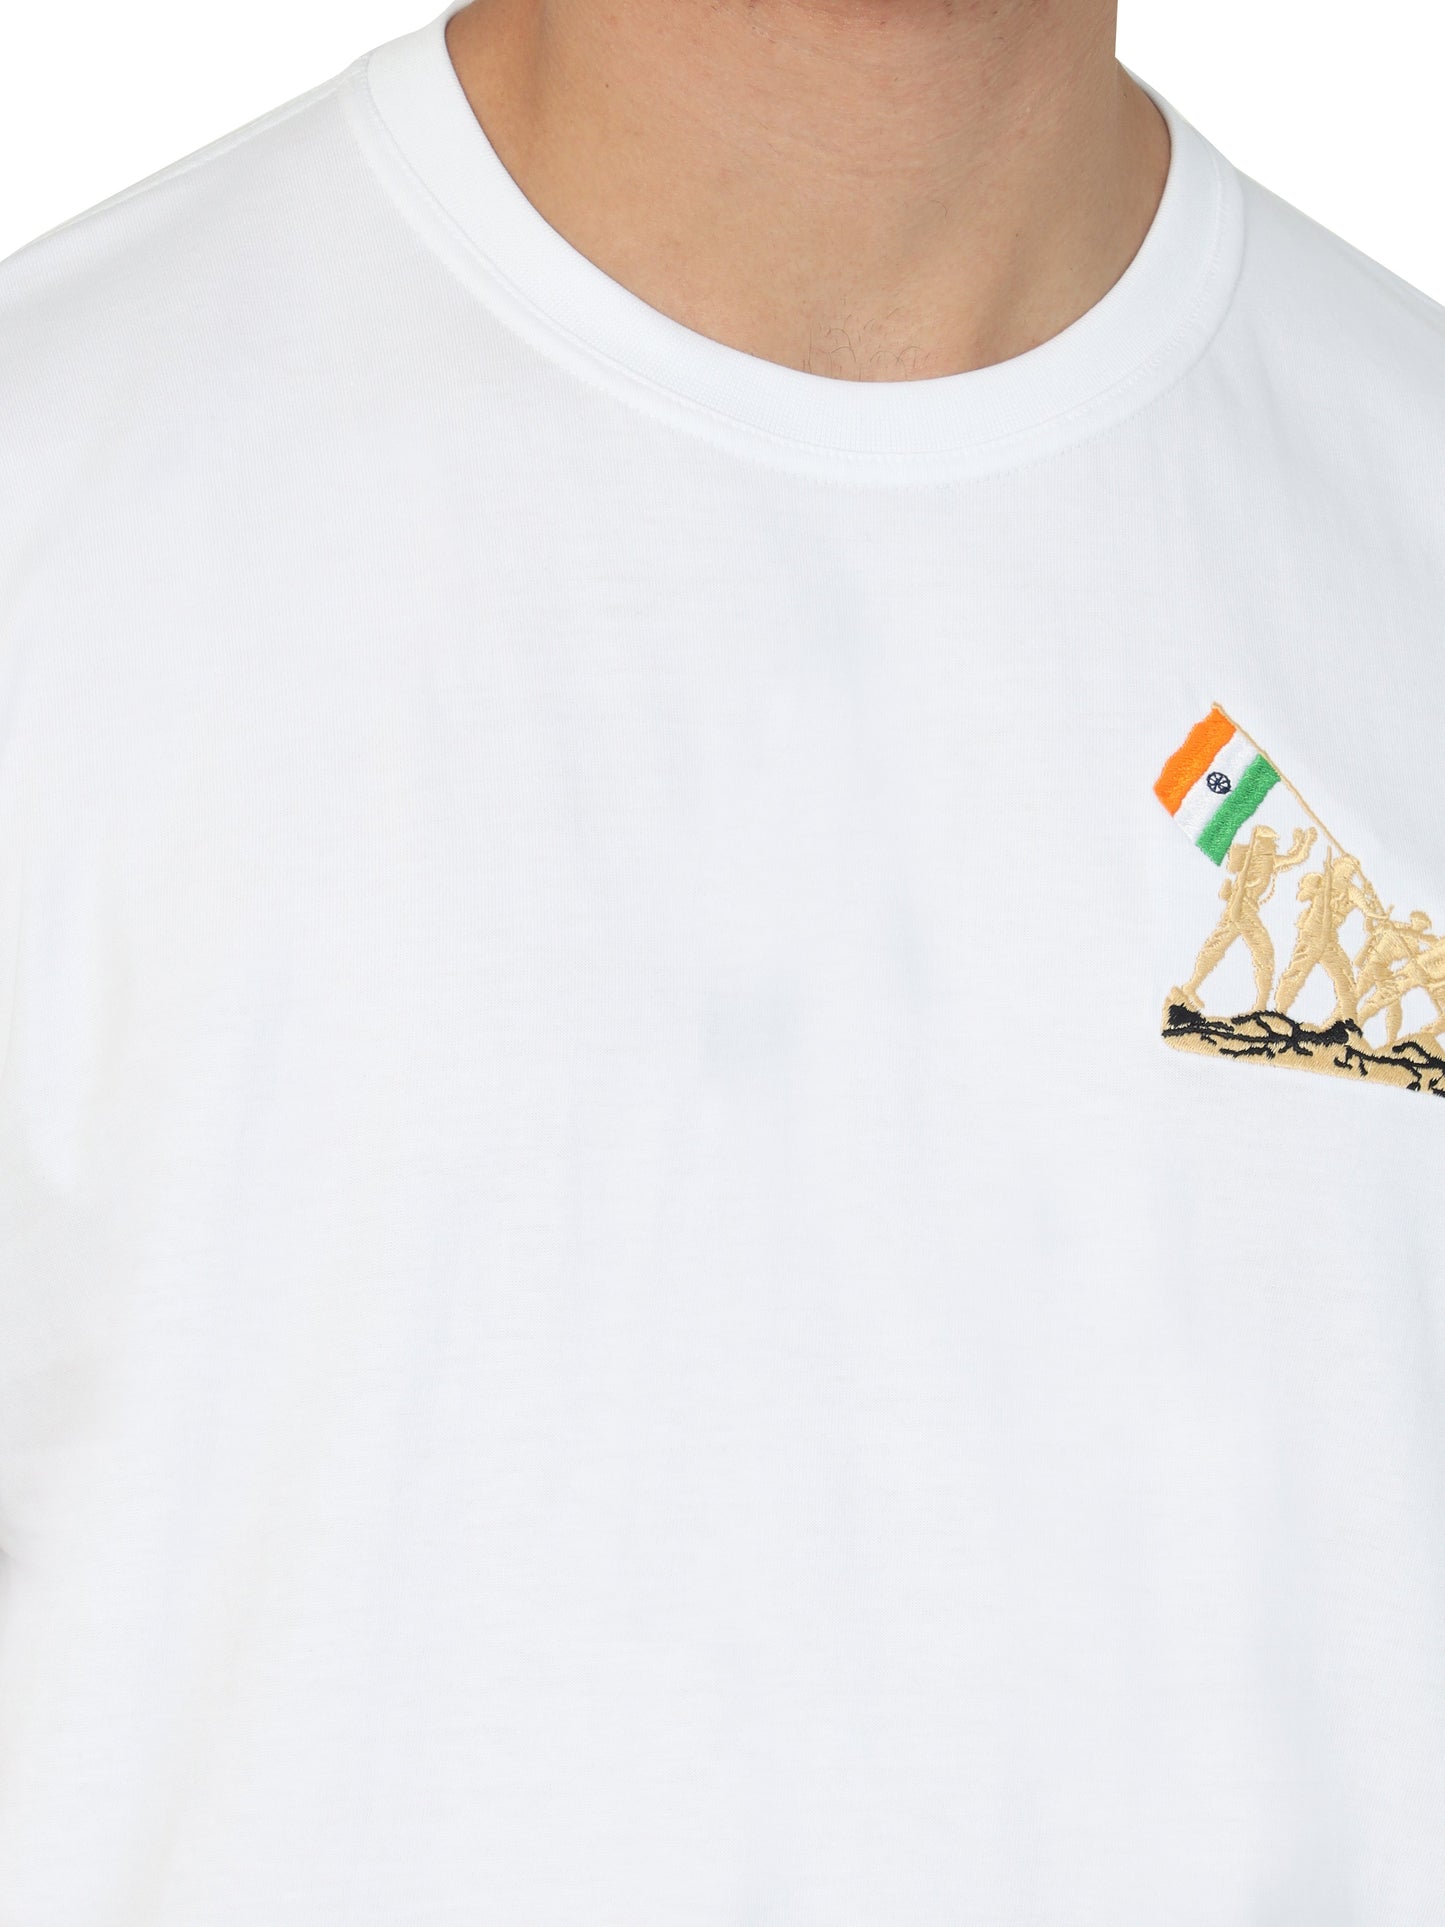 SOLDIERS WITH FLAG | ROUND NECK T-SHIRT